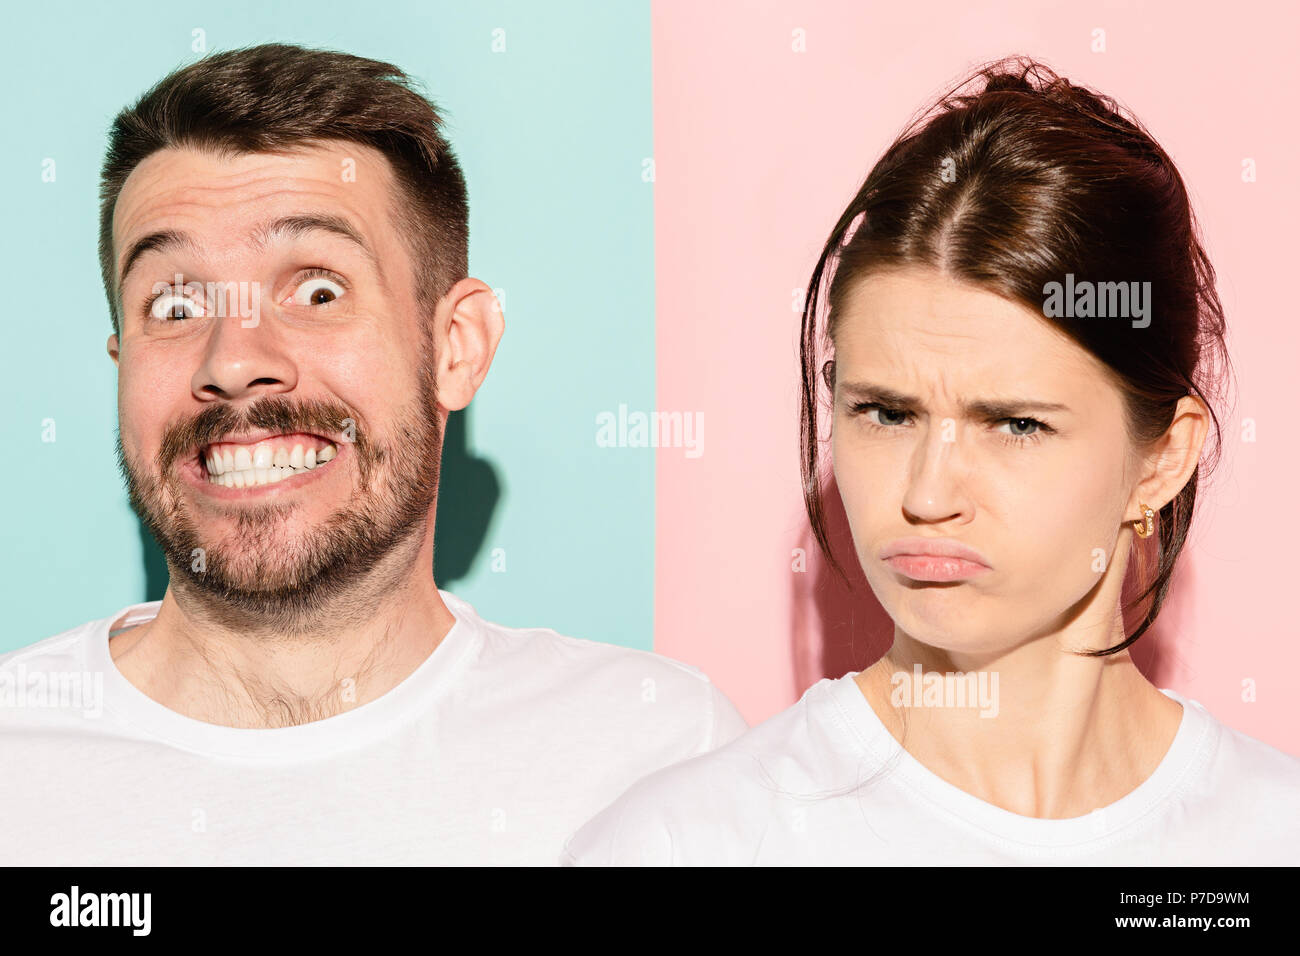 Closeup portrait of young couple, man, woman. One being excited happy smiling, other serious, concerned, unhappy on pink and blue background. Emotion contrasts Stock Photo